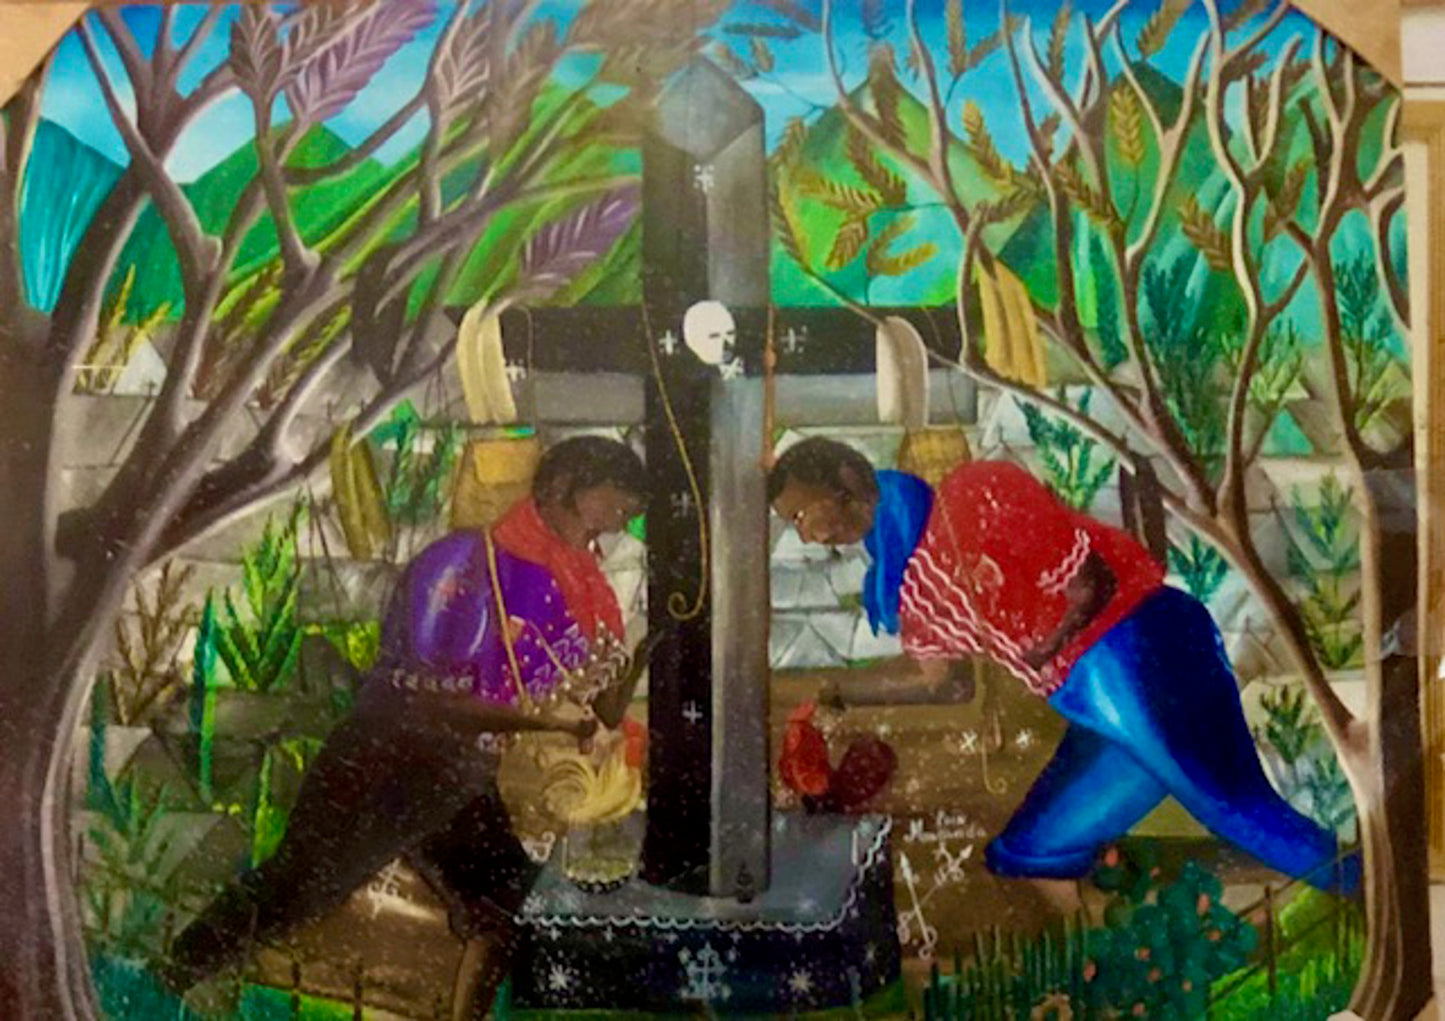 Andre Pierre (Haitian, 1914-2005) "Voodoo Ceremony at Cemetery" Unframed Oil on Board Painting 50"h x 39"w #1GSN-NY